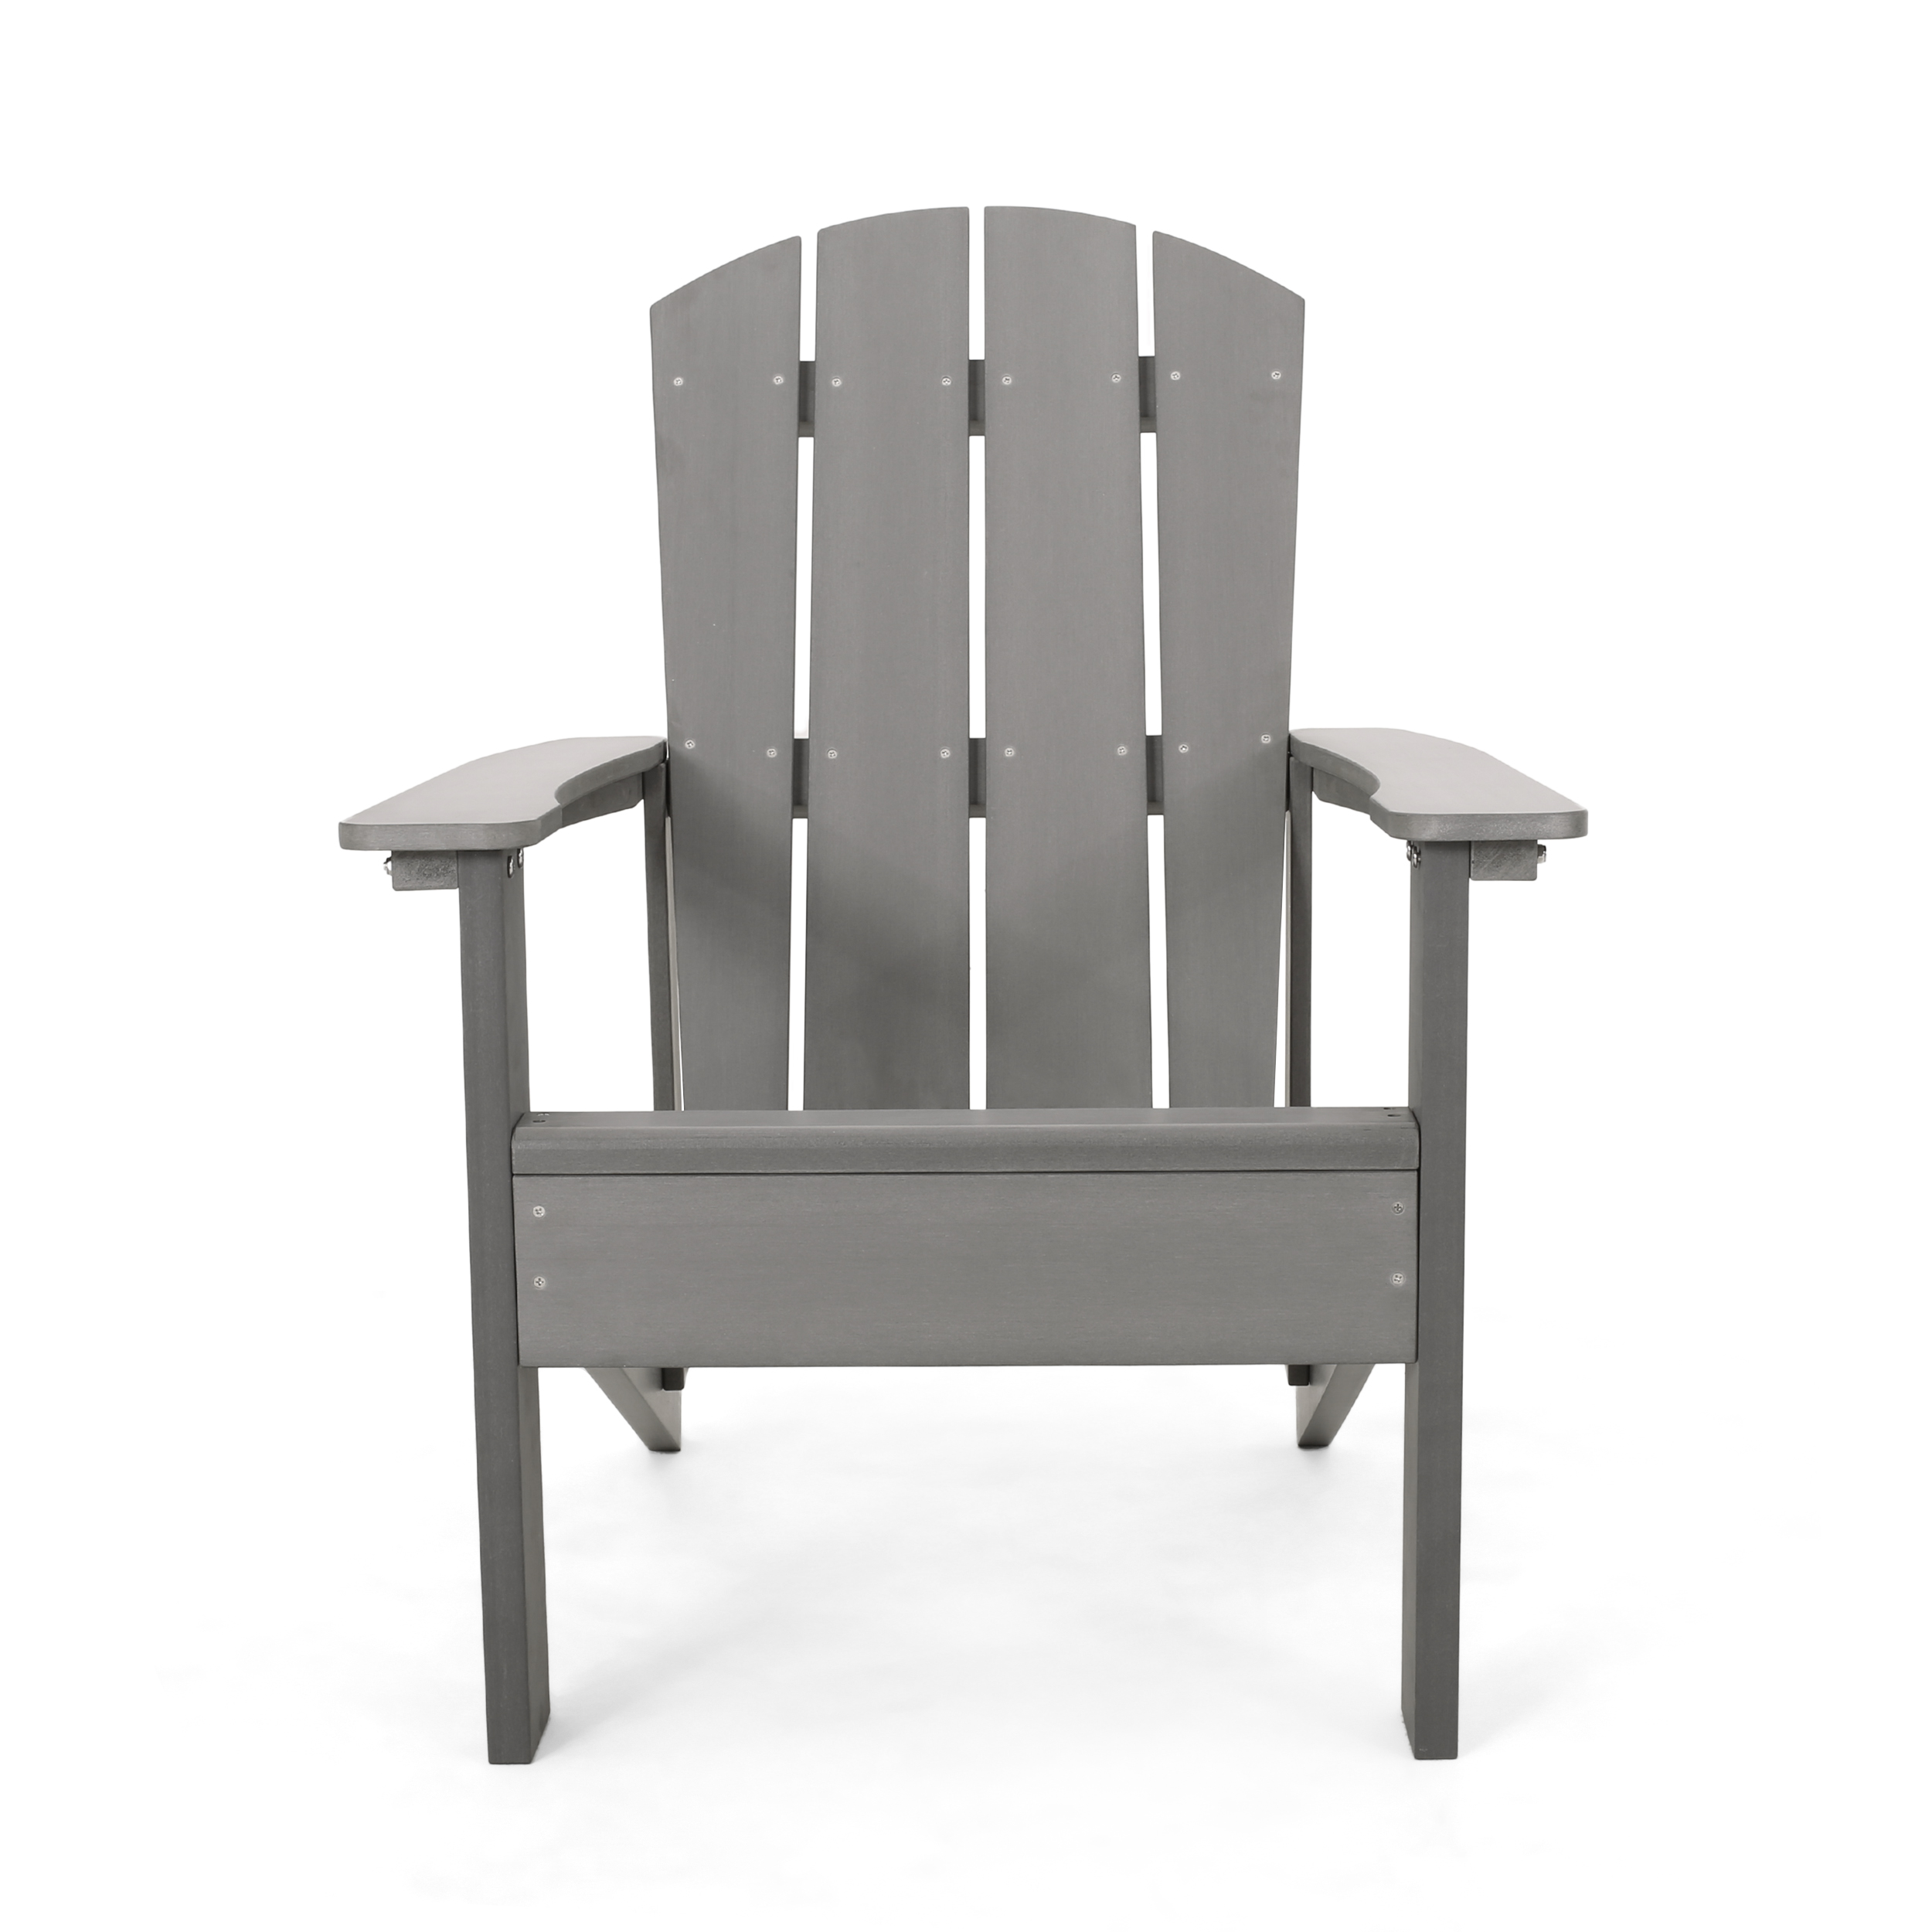 LANTRO JS Classic Solid Gray Outdoor Solid Wood Adirondack Chair Garden Lounge Chair - image 2 of 9